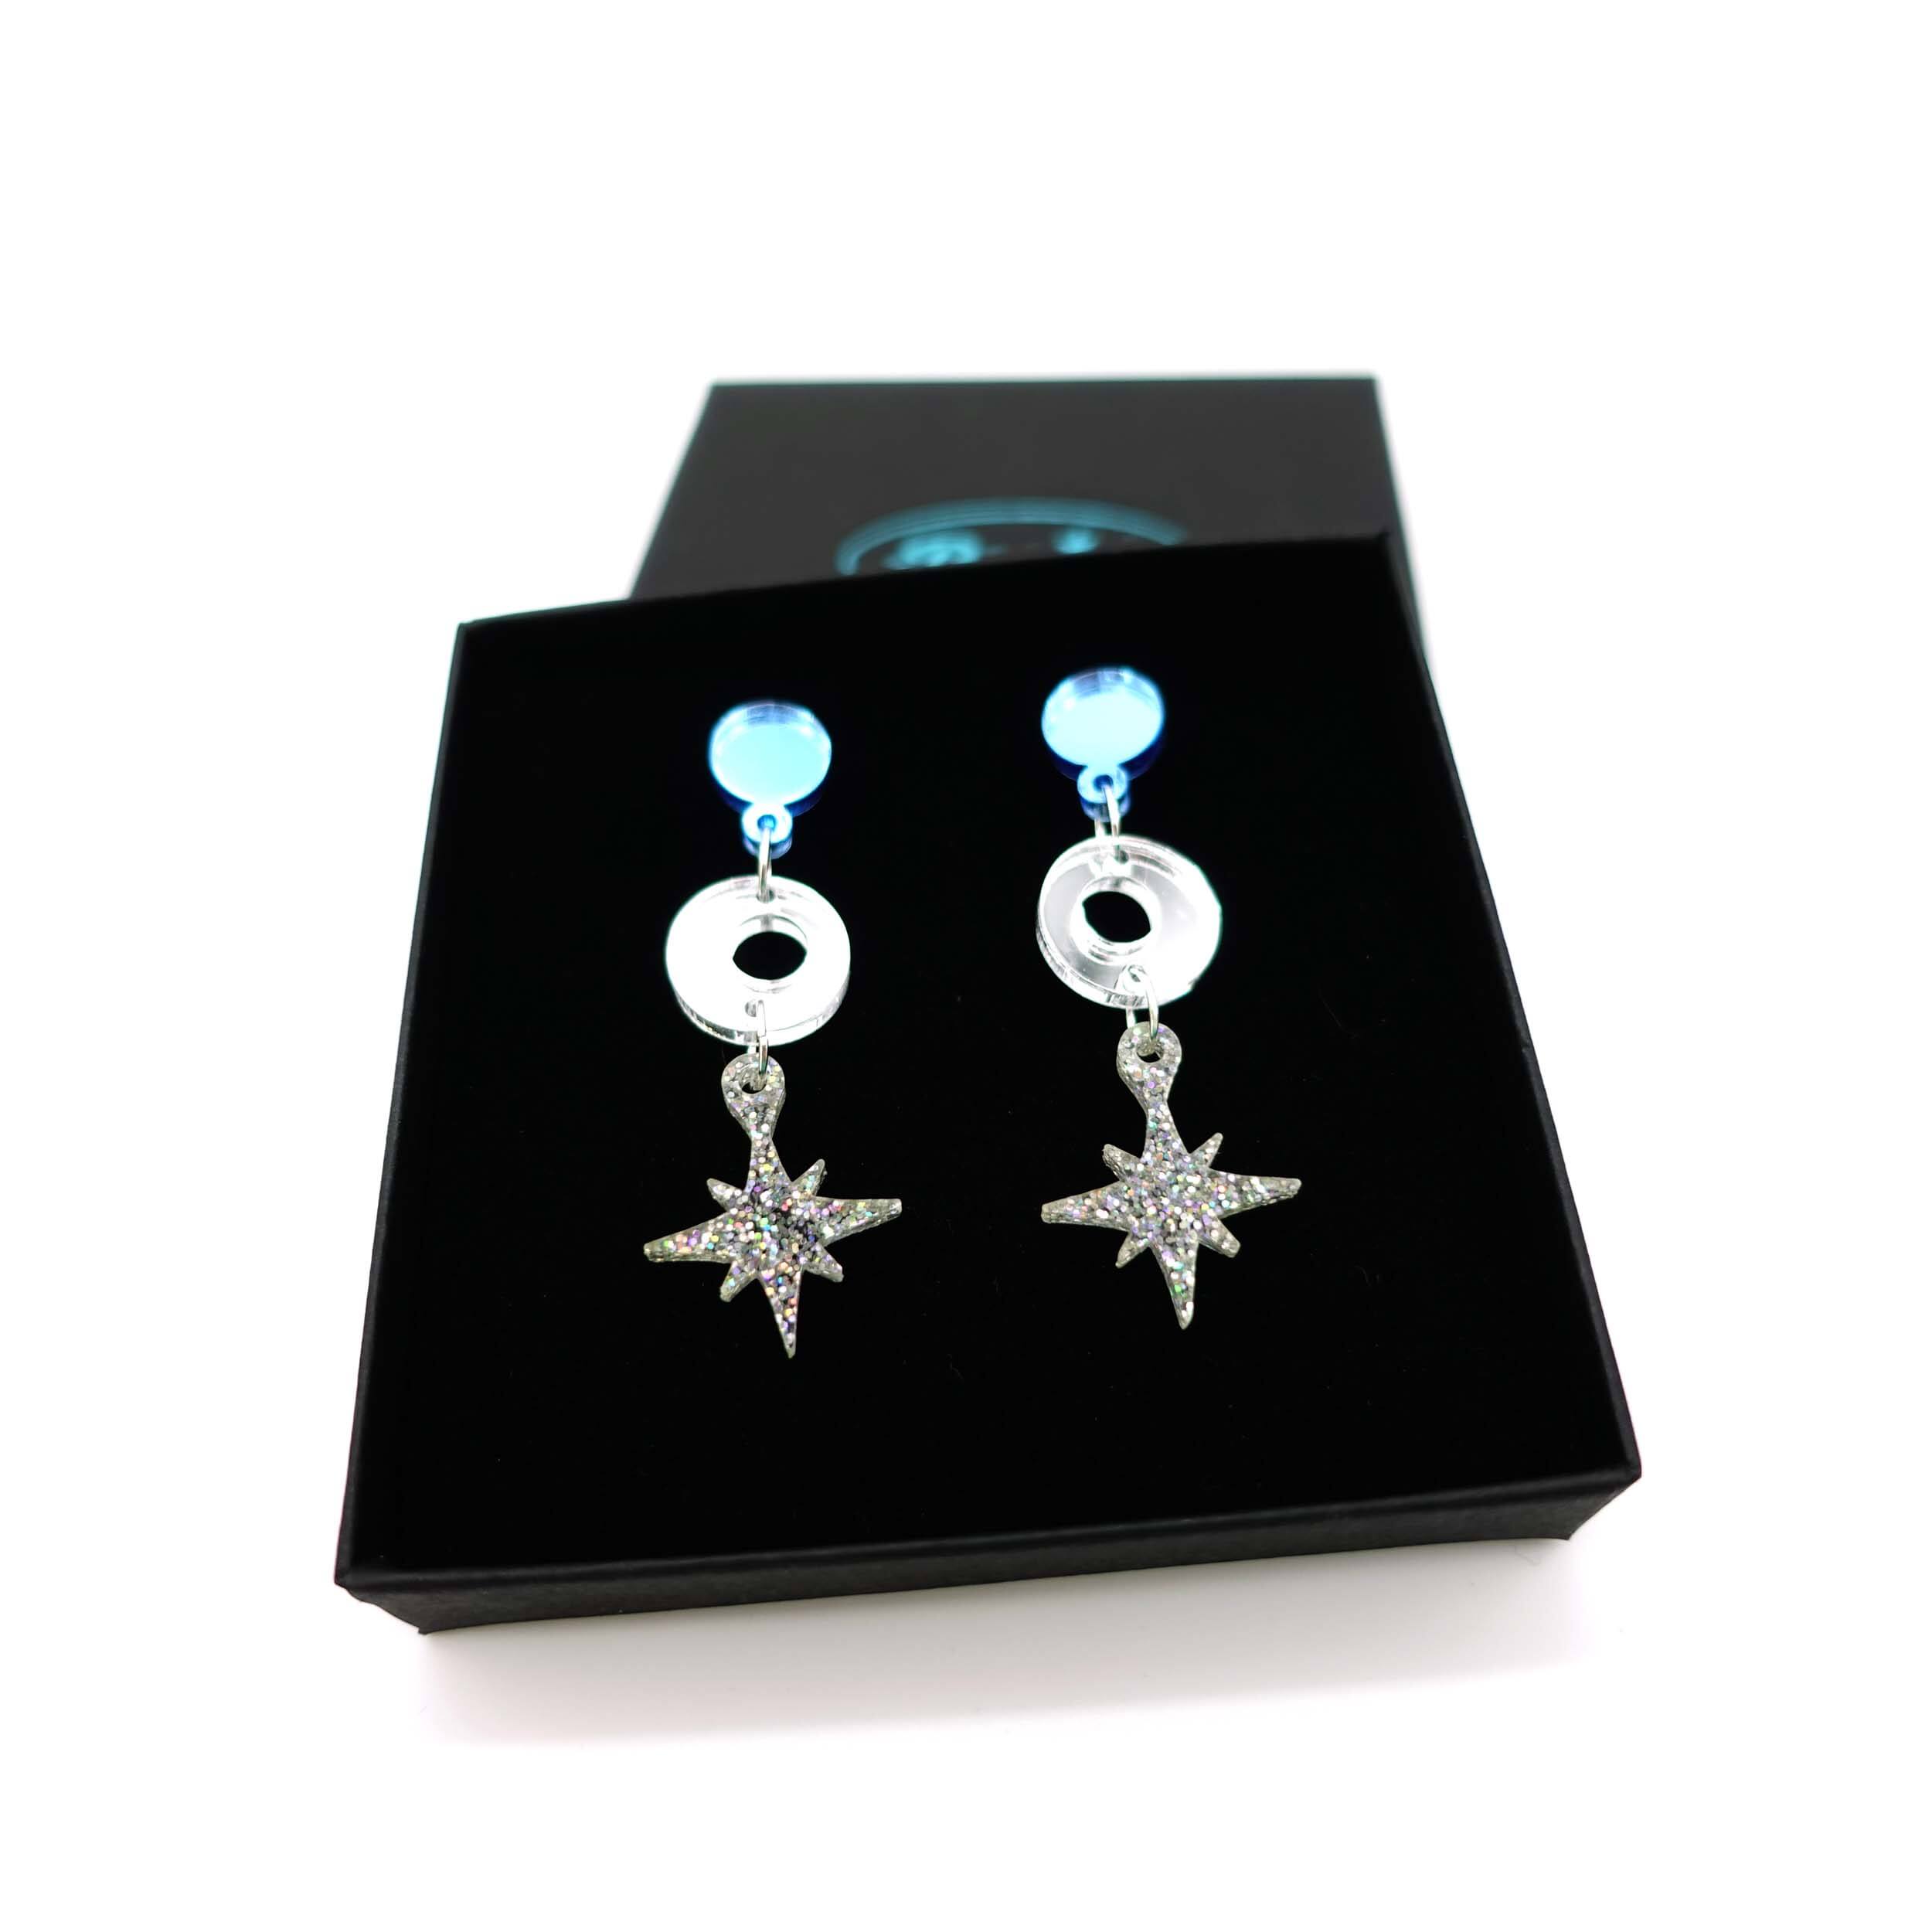 Cool silver Deco Star earrings shown in a Wear and Resist gift box. 